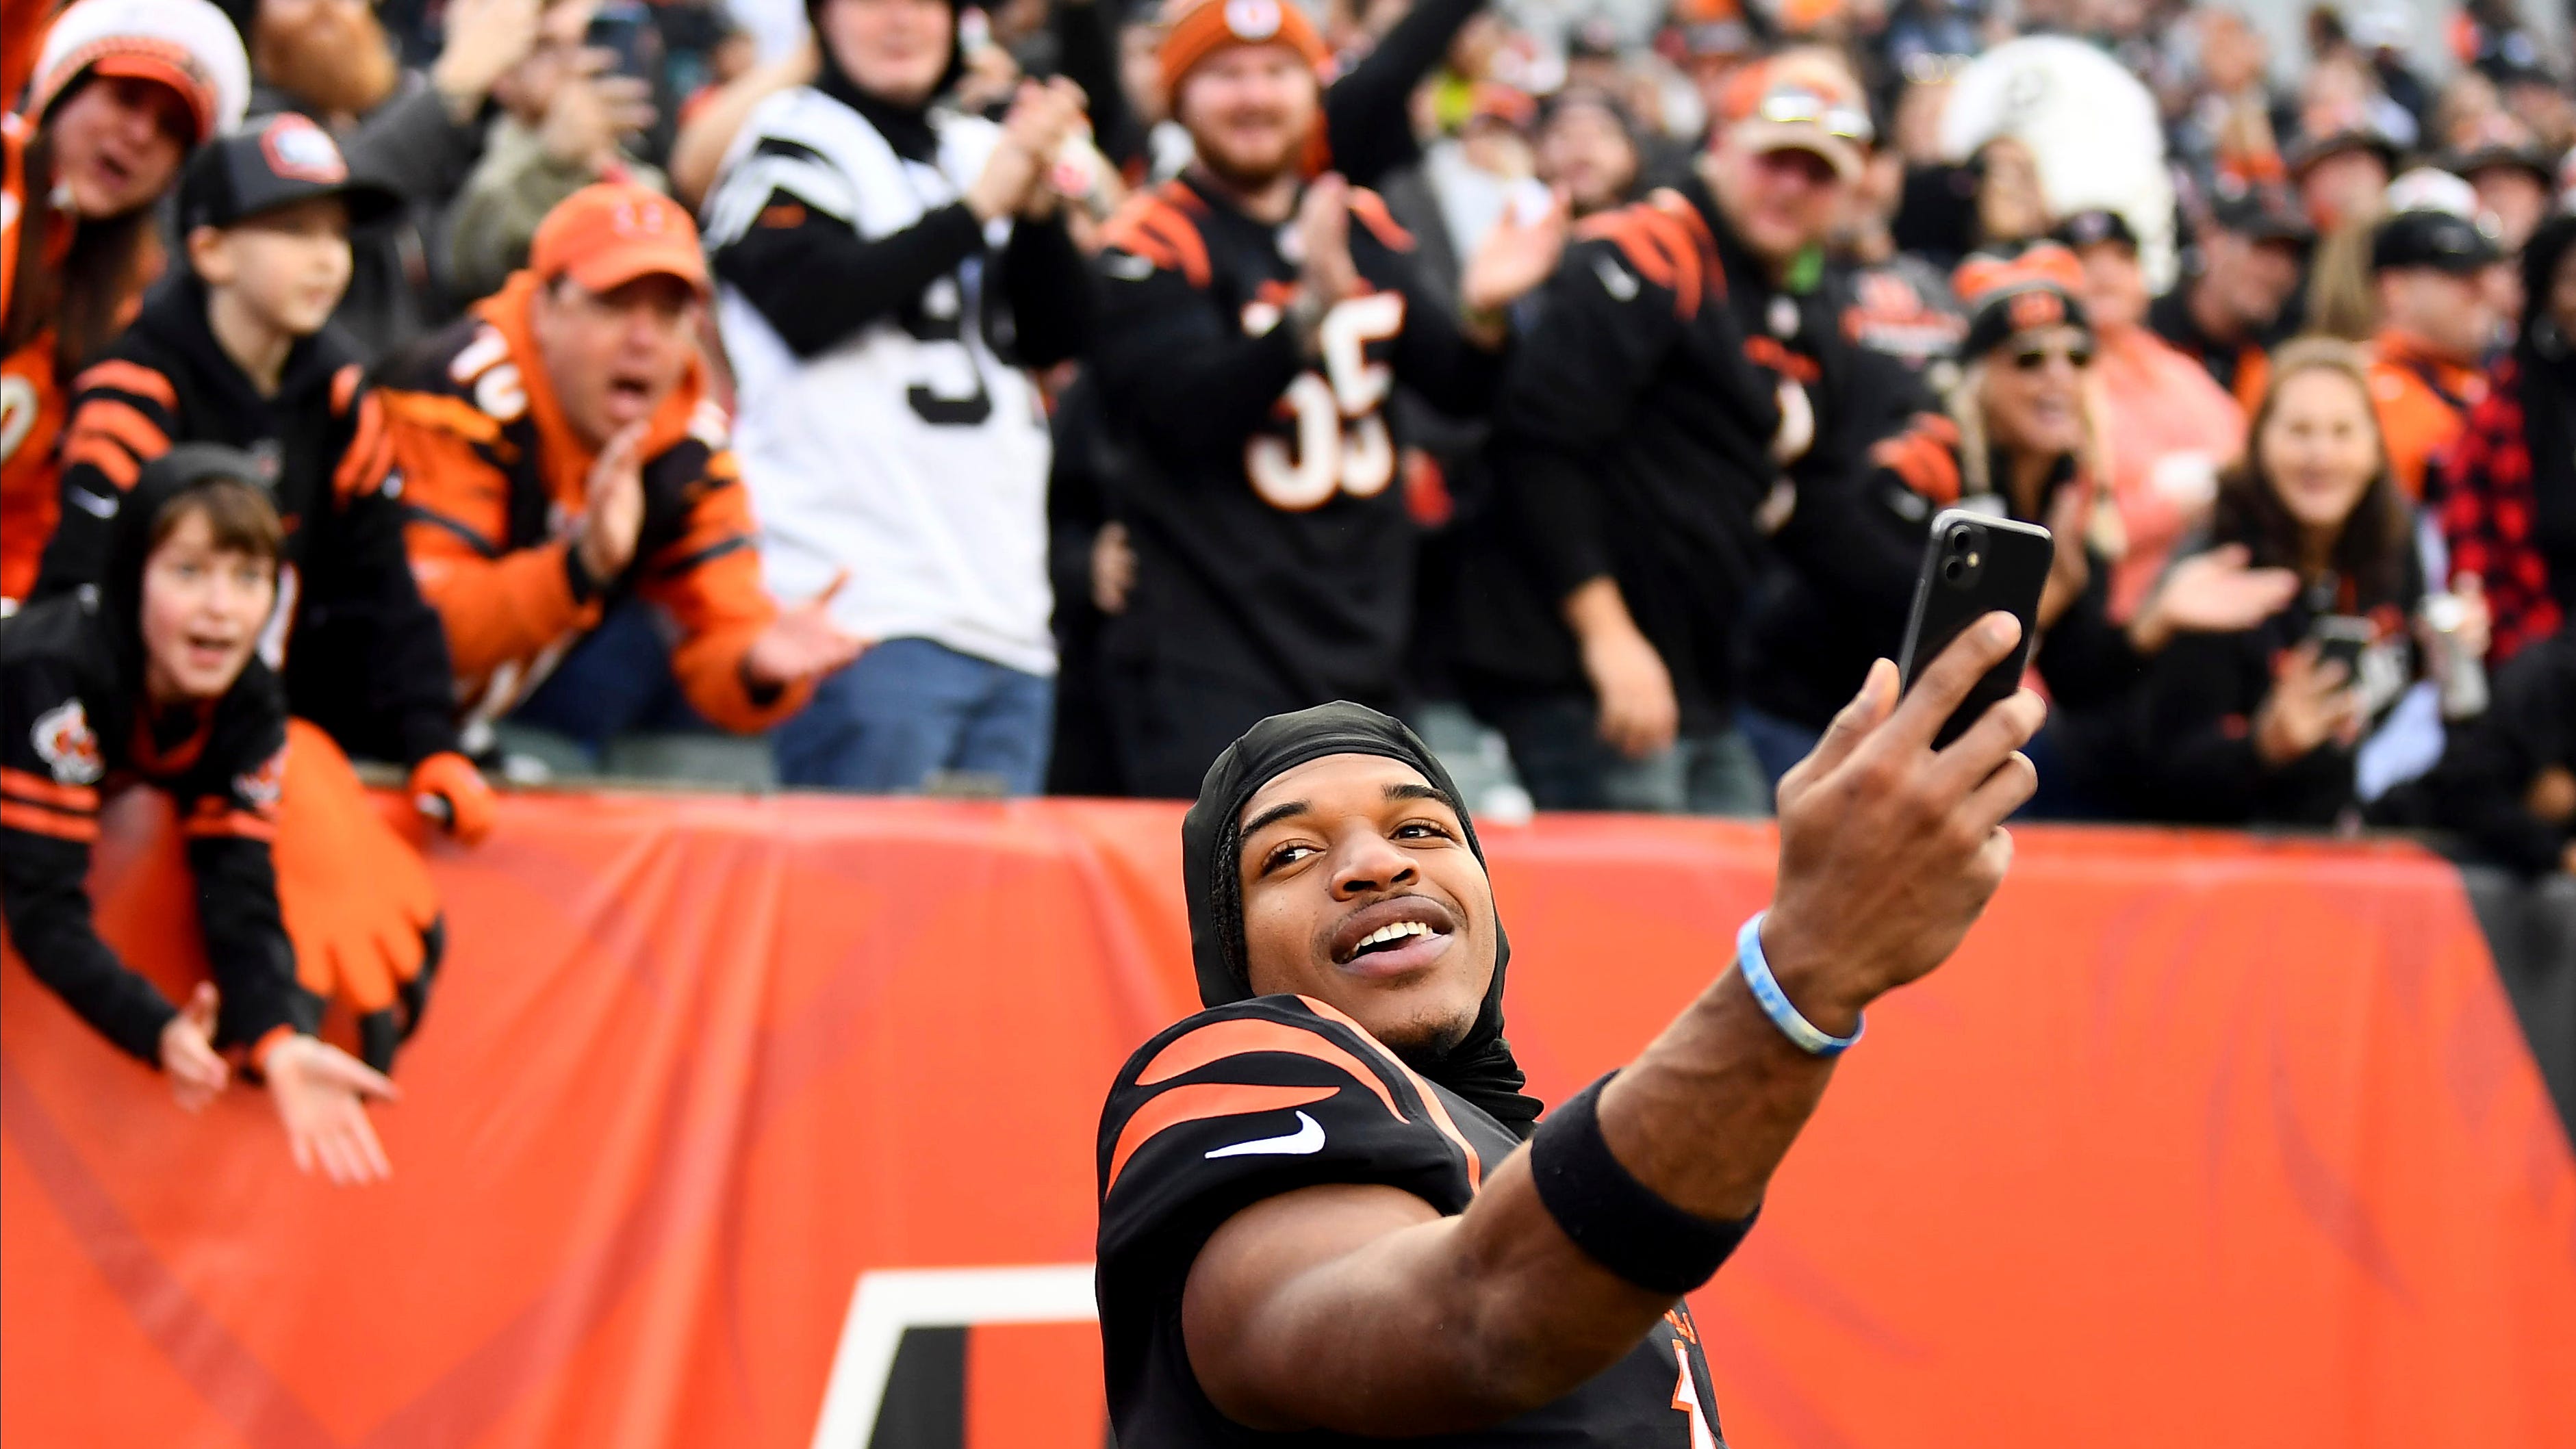 Cincinnati Bengals wide receiver Ja'Marr Chase (1) takes a video with fans after a 41-21 win over the Baltimore Ravens after an NFL football game, Sunday, Dec. 26, 2021, in Cincinnati.